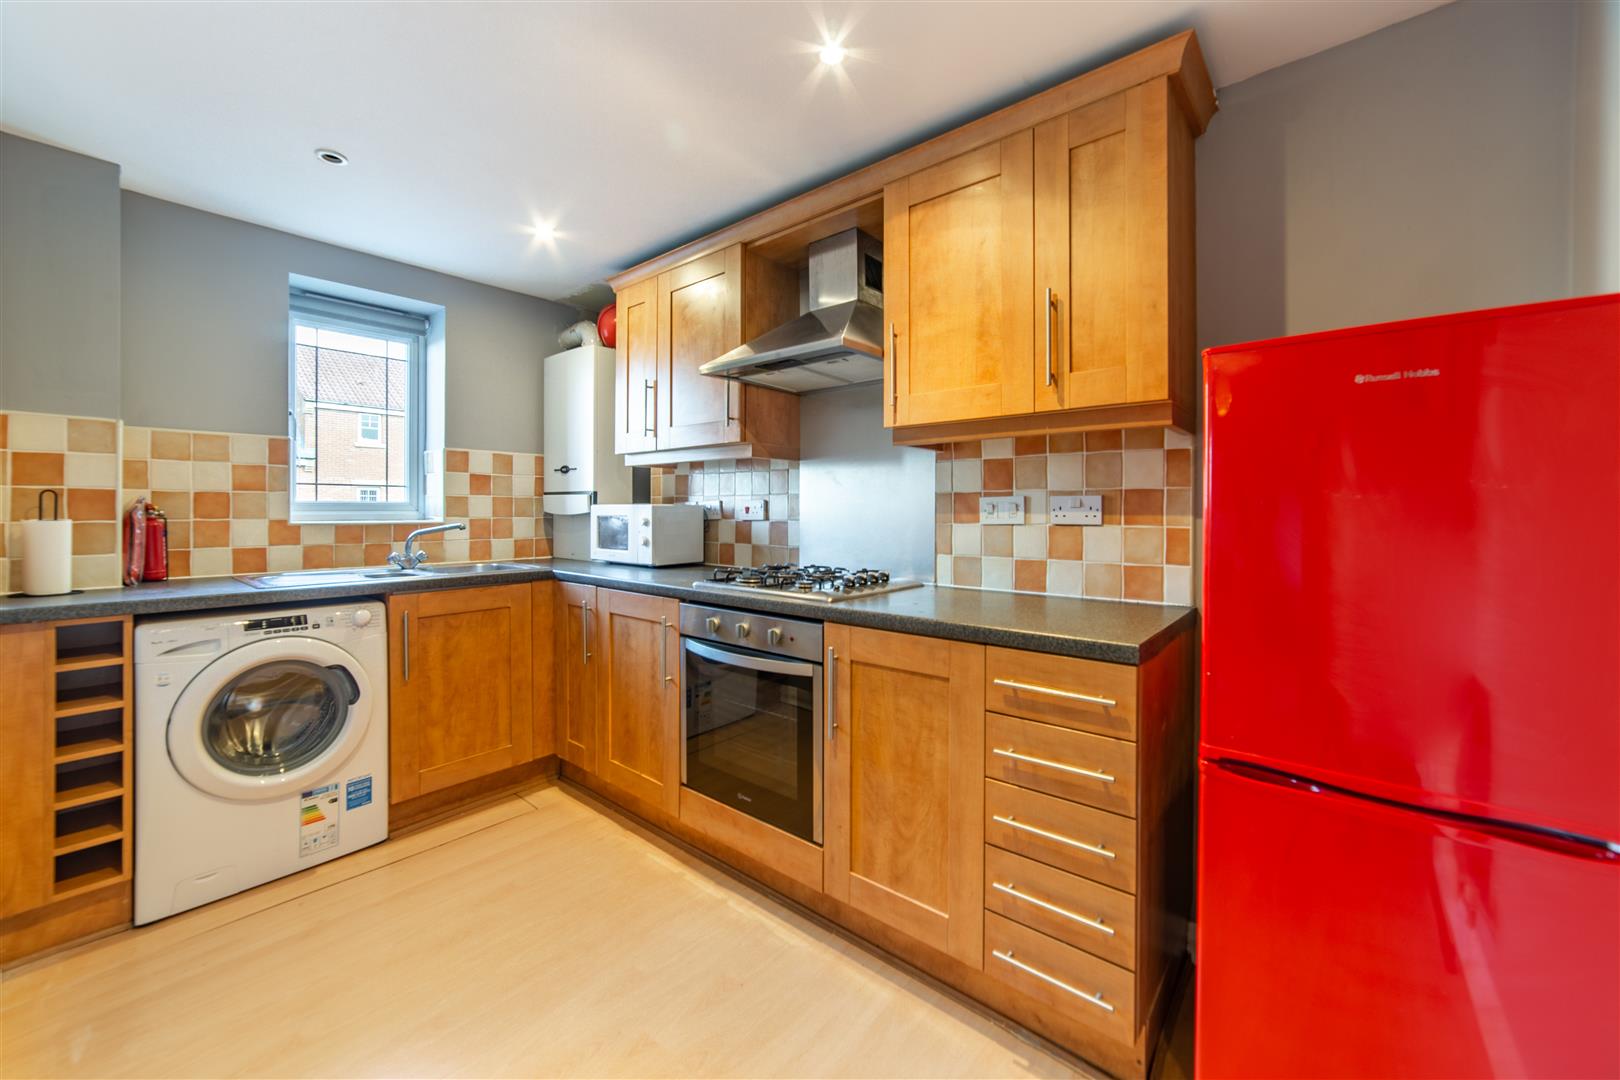 2 bed apartment to rent in Foster Drive, Gateshead - Property Image 1